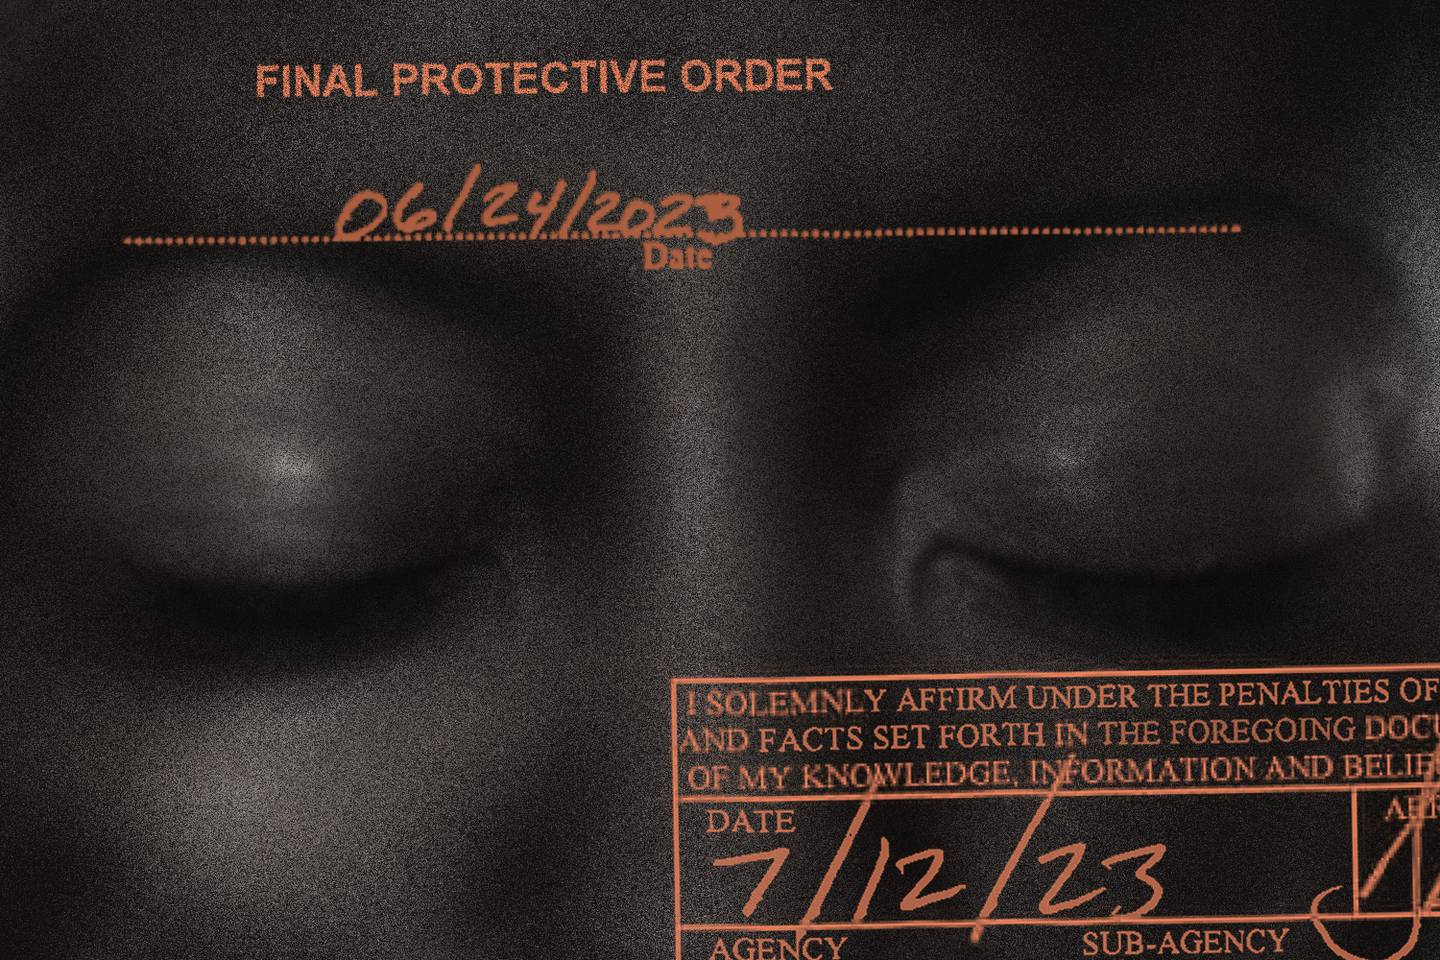 Photo collage of grainy image of woman’s eyes, close up and closed, with excerpts from court documents including text “Final Protective Order” and the dates June 24, 2023 and July 12, 2023.